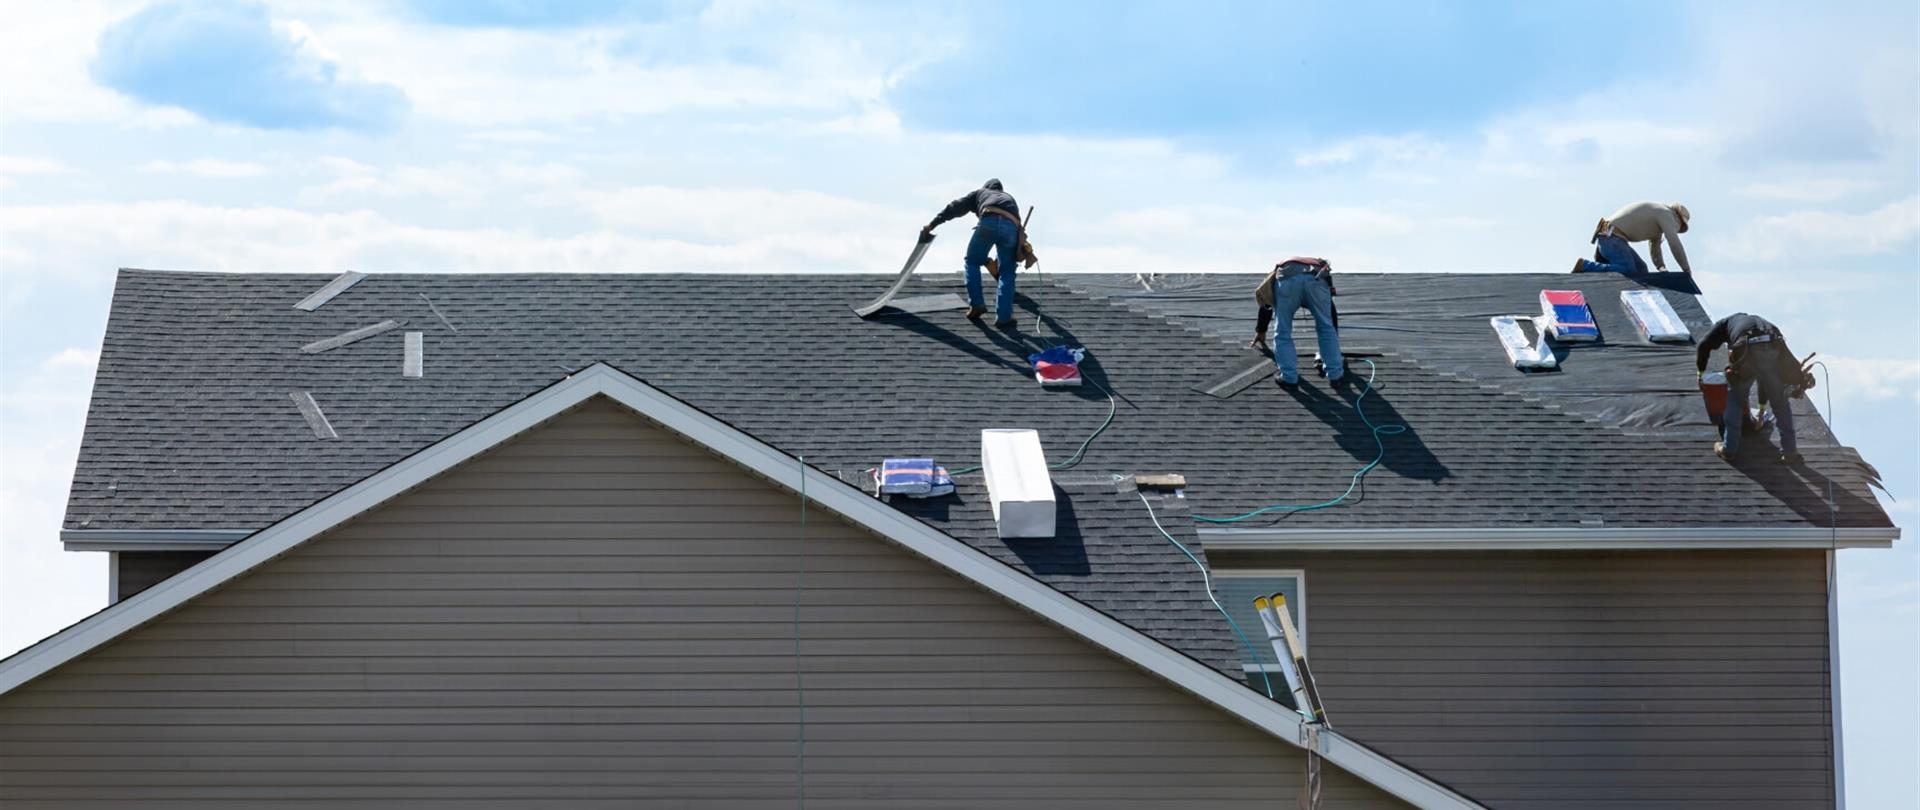 Local Roofing Contractor, providing Expert Residential and Commercial Roofing Services in Richland WA